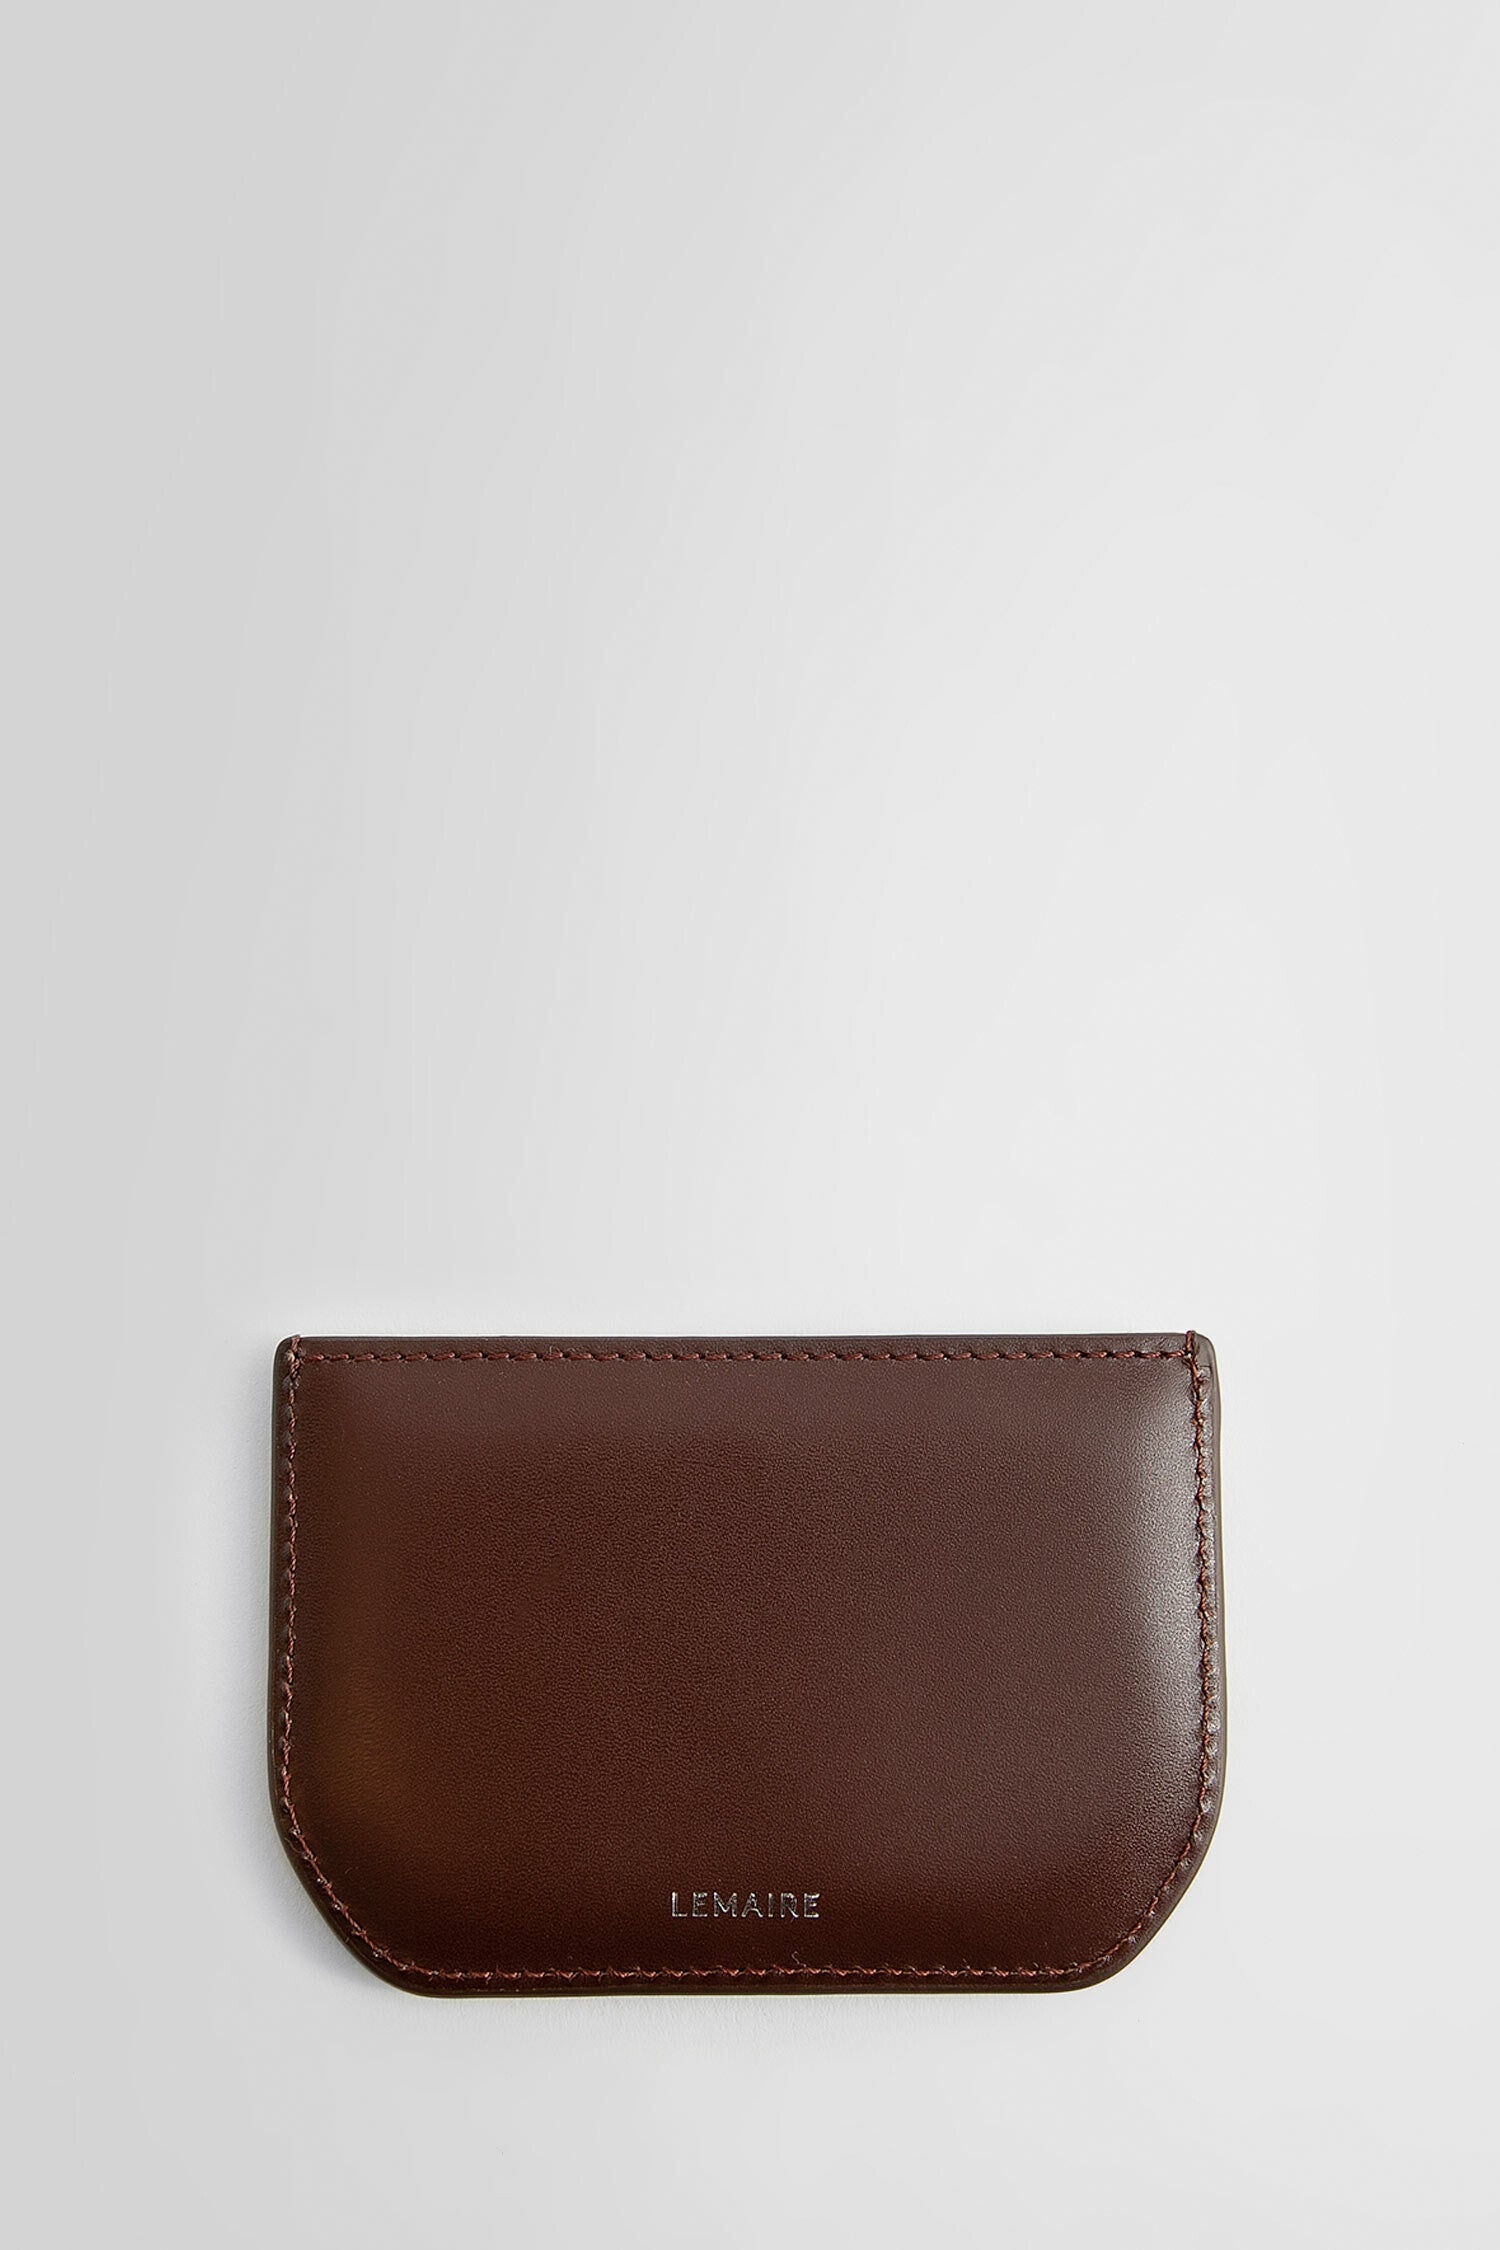 LEMAIRE UNISEX BROWN WALLETS & CARDHOLDERS - 2